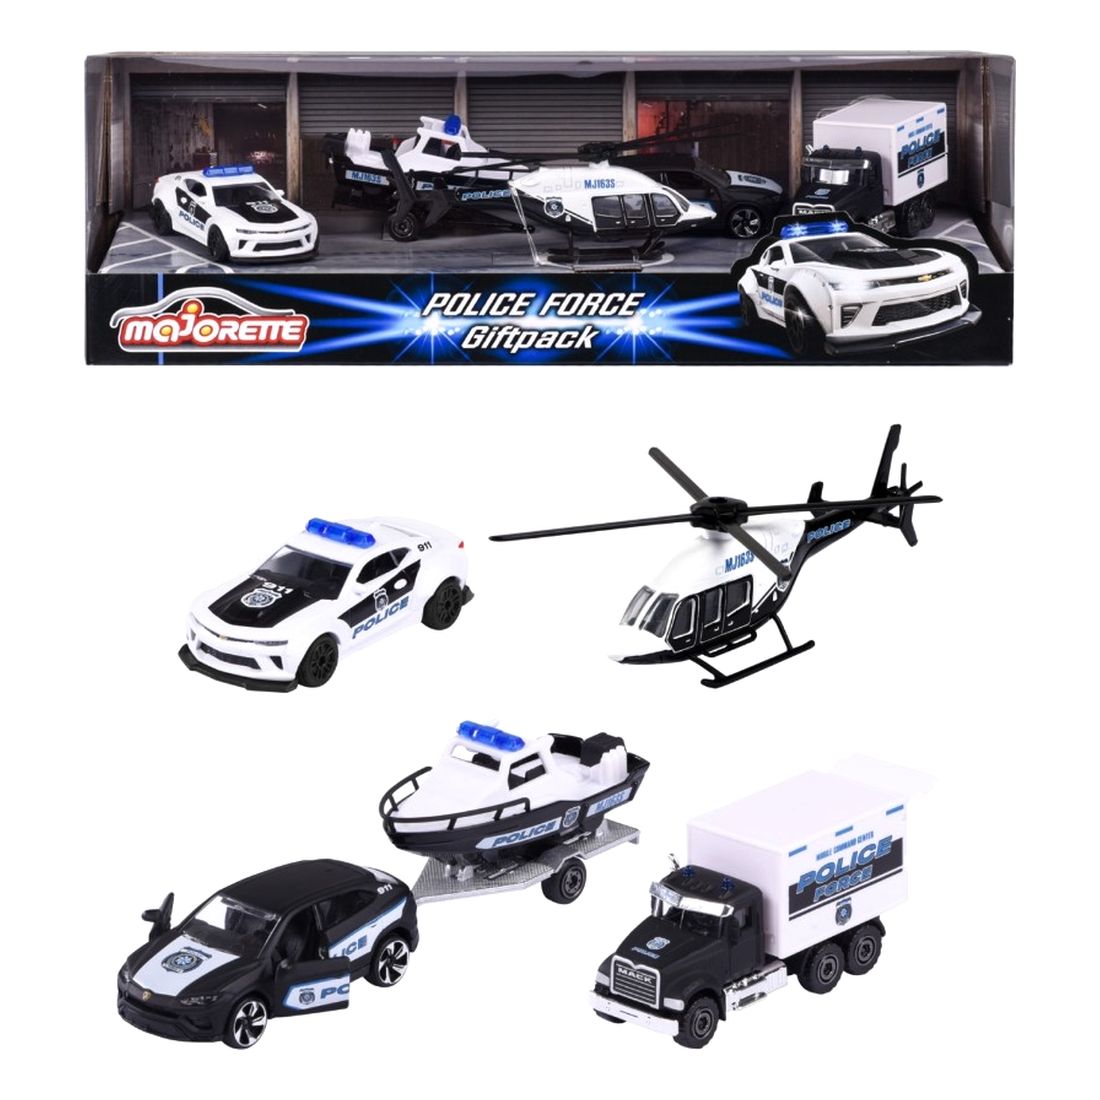 Majorette Police Force Giftpack Diecast Cars (Pack of 5)